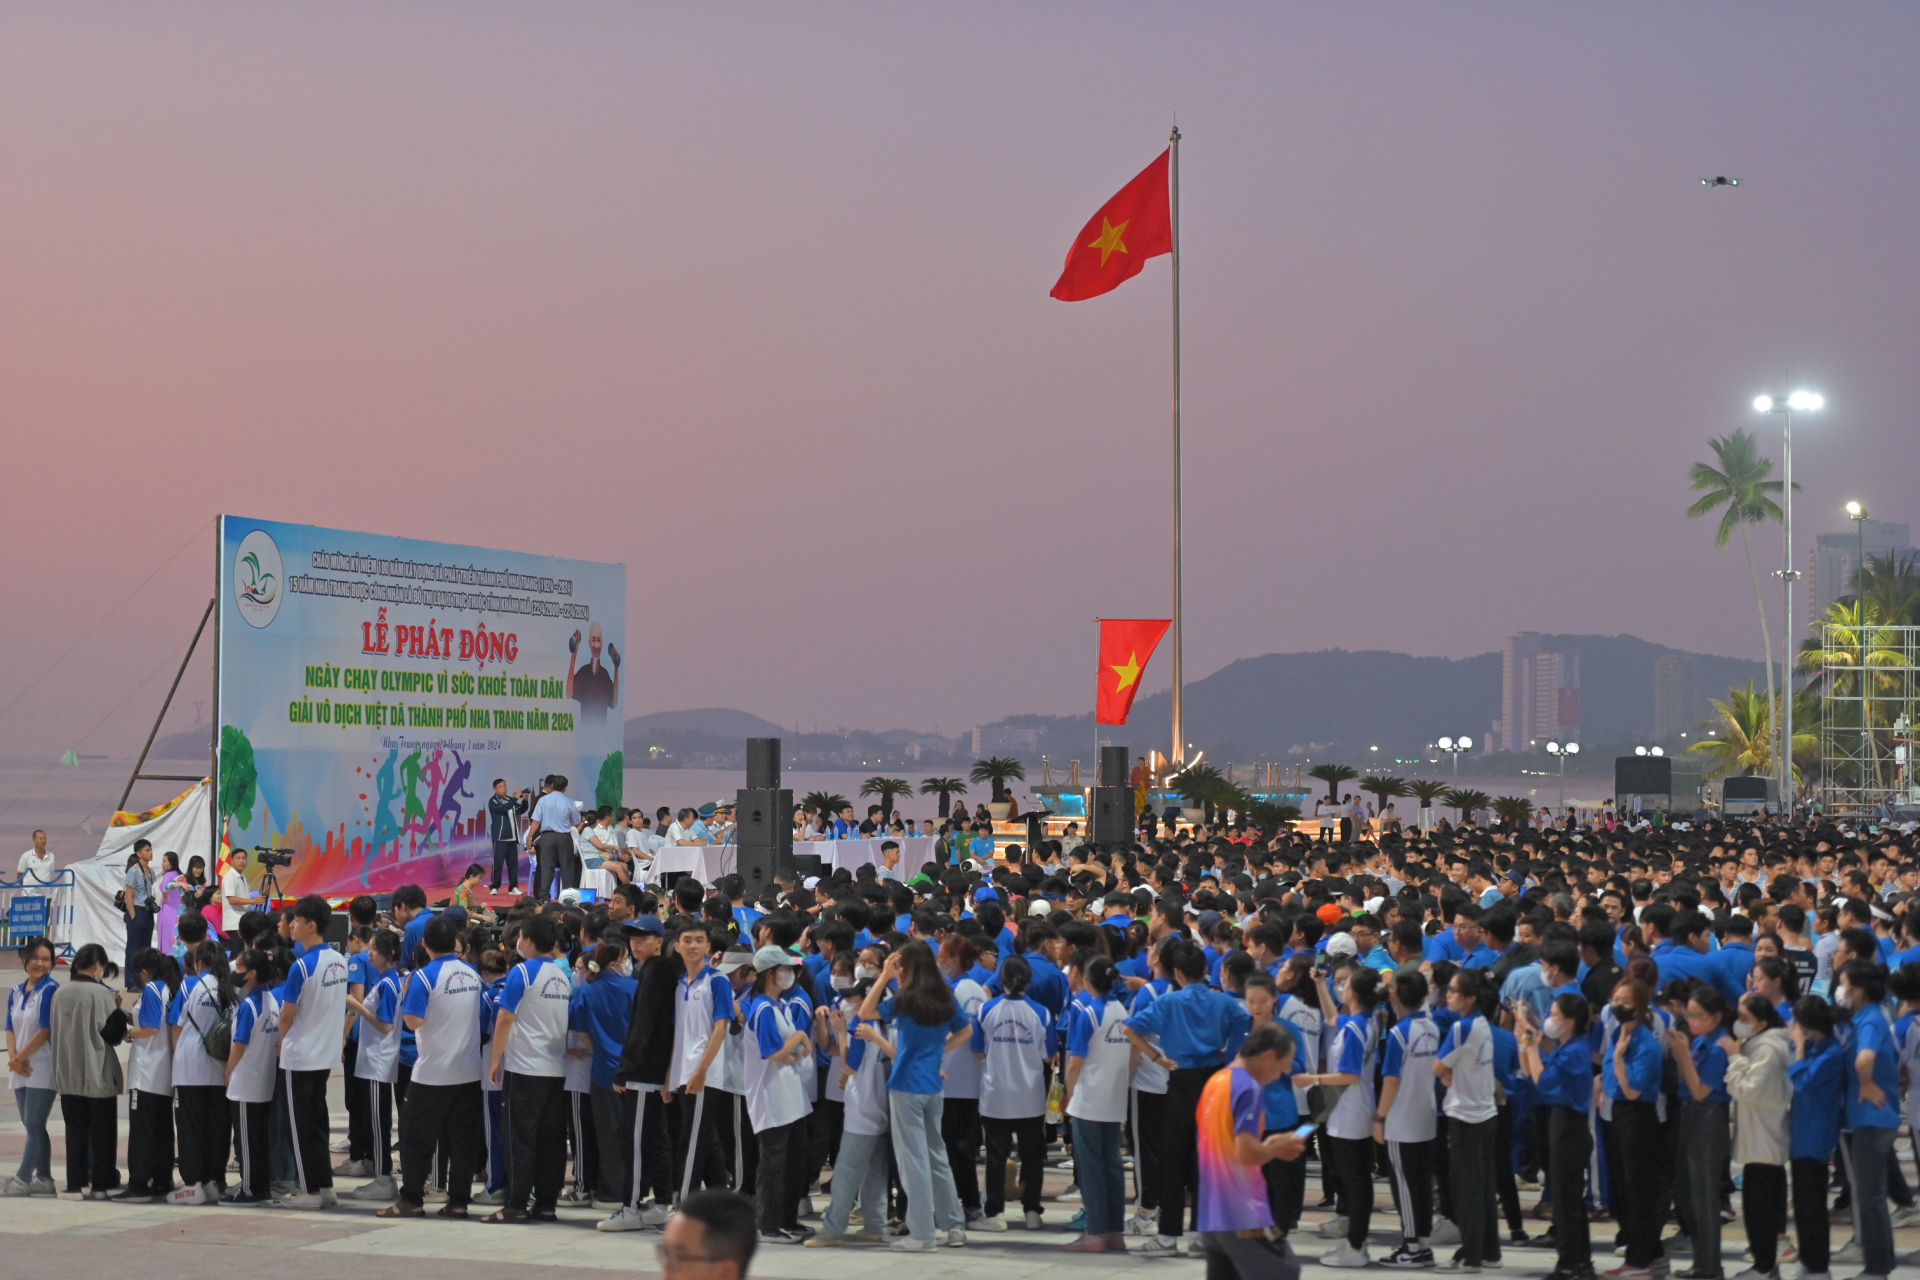 Over 6,000 people participate in Olympic Running Day in Nha Trang City